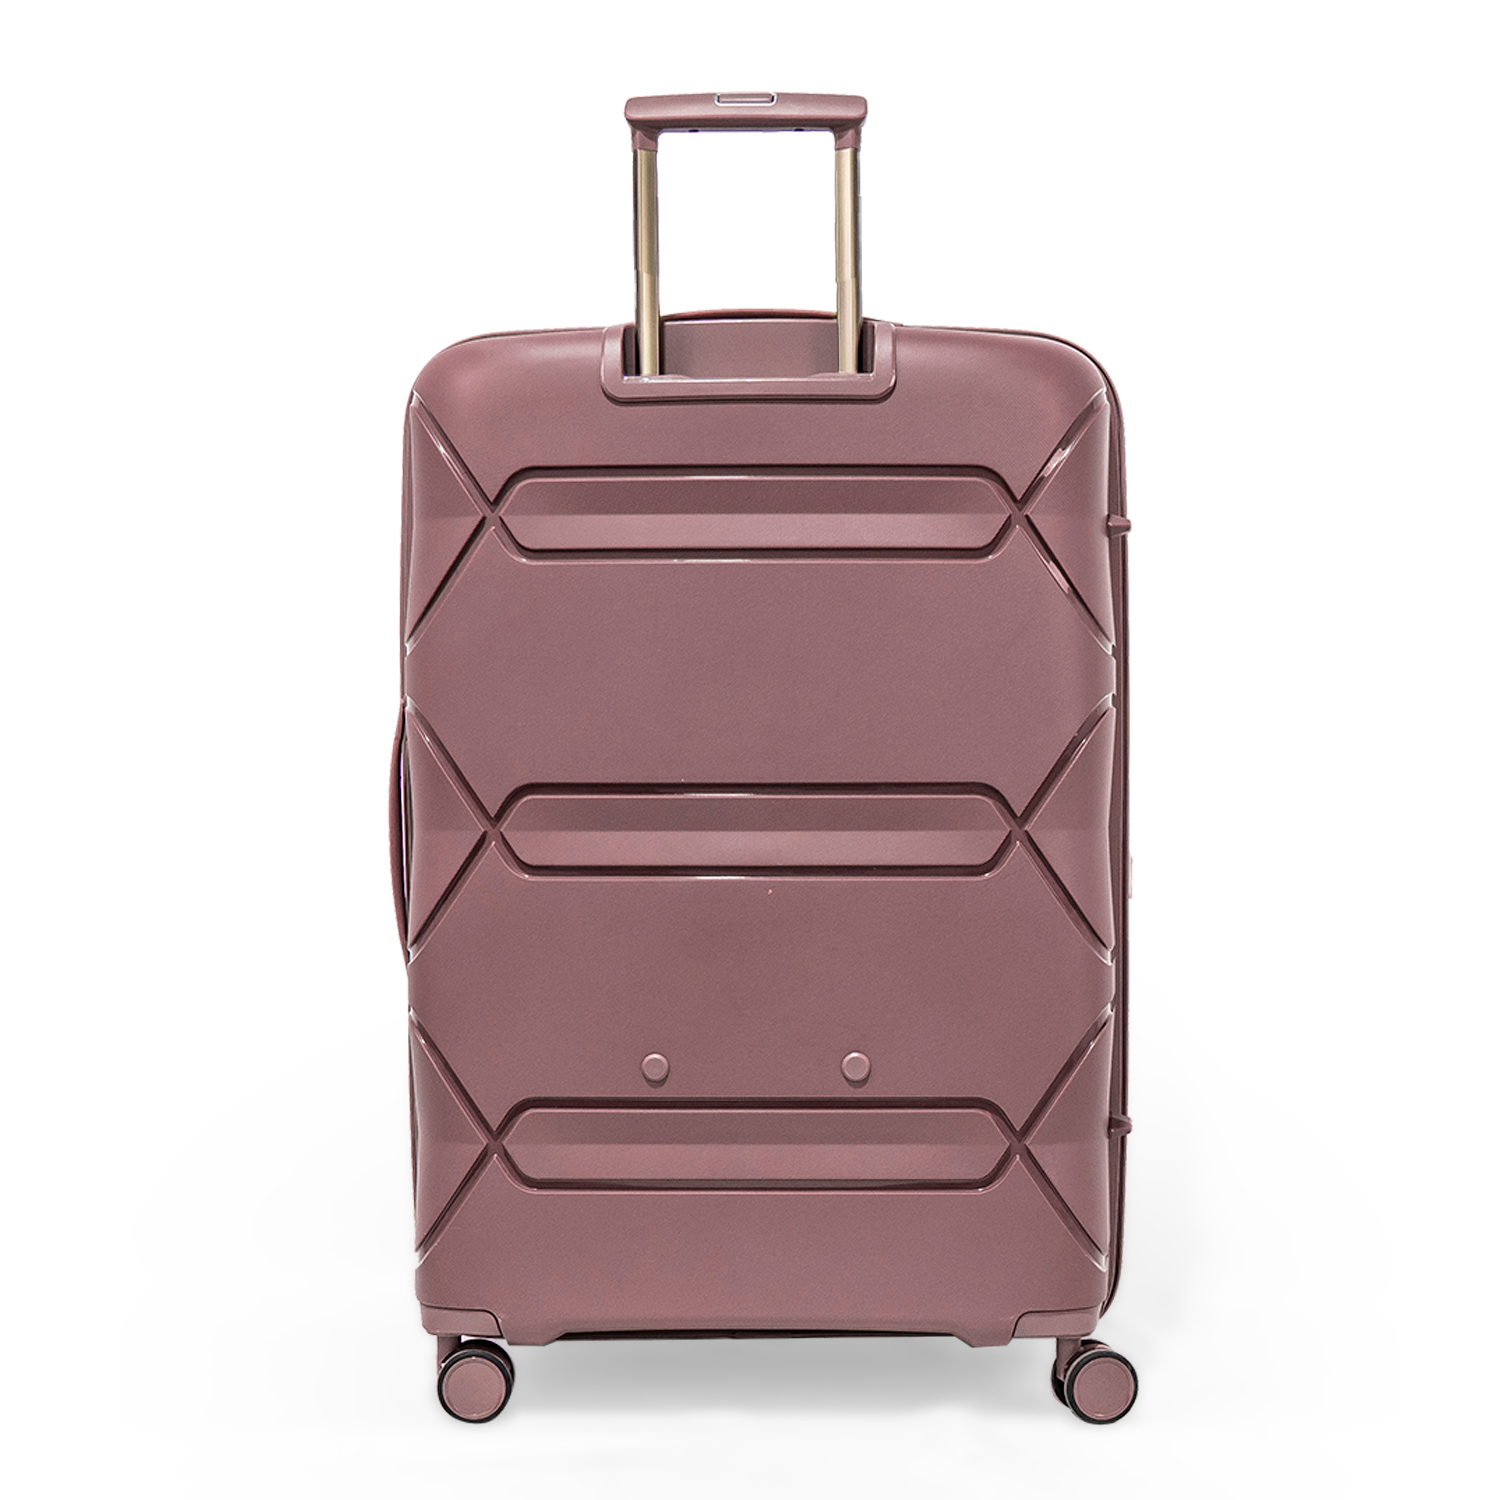 Pierre Cardin Trolley Strong Flexible Suitcases Set of 3 Rose Gold